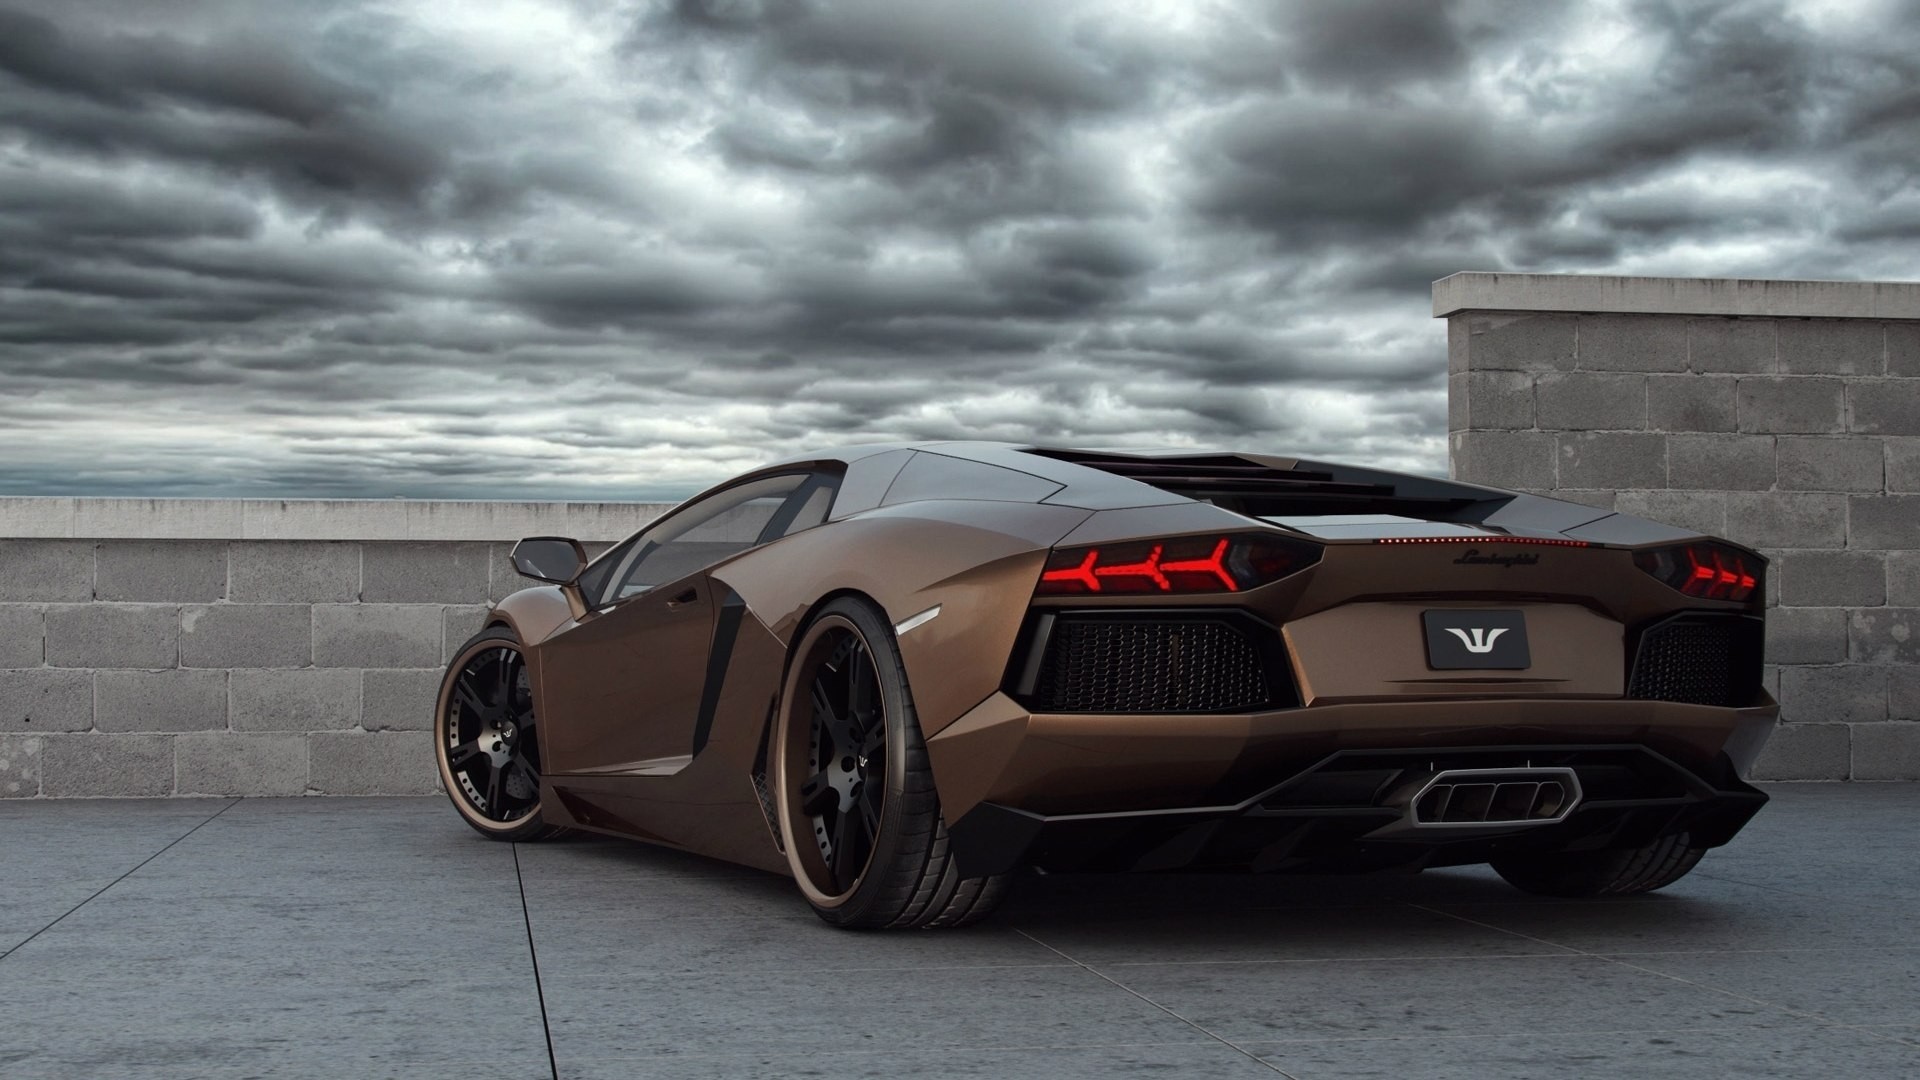 1920x1080 Cars Wallpapers Hd 1080p Download 93 with Cars Wallpapers Hd 1080p Download